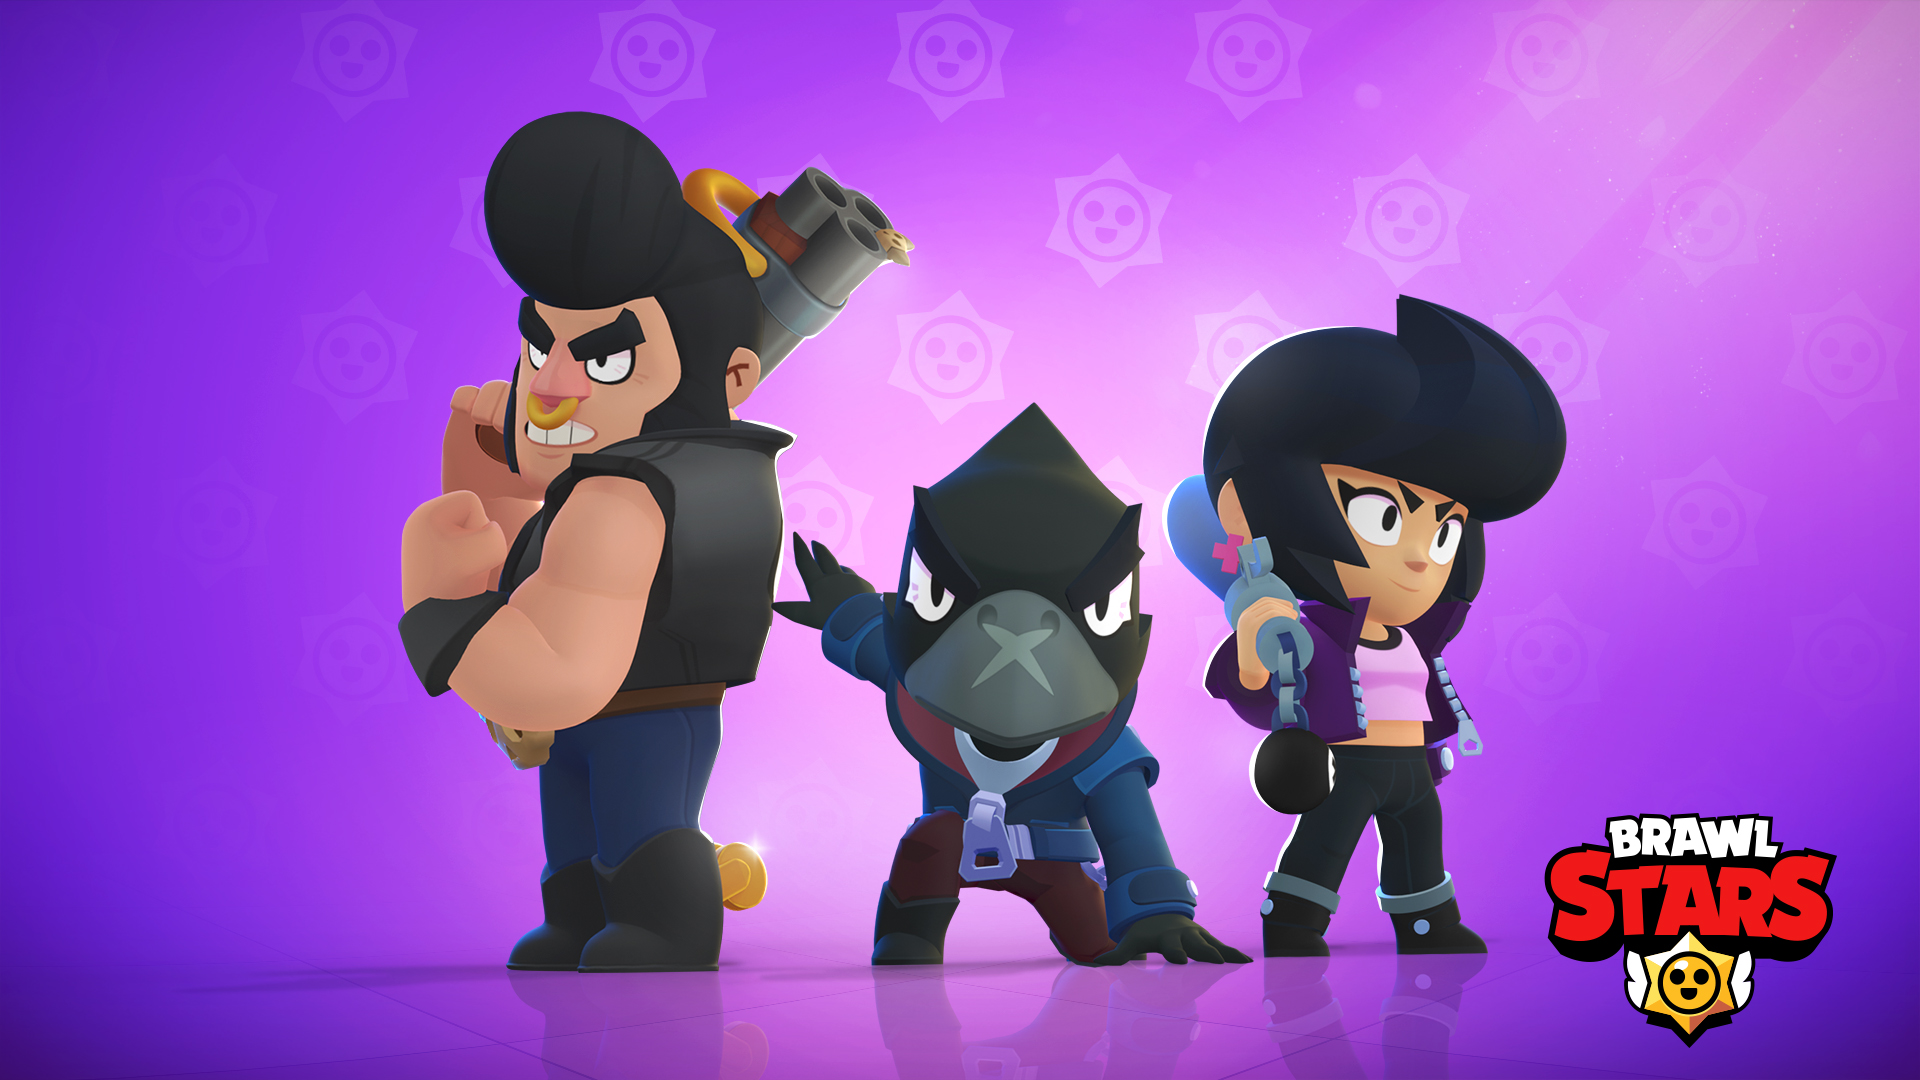 Brawl Stars Sur Twitter We Know Playing With Randoms Can Be Tough Sometimes So How About Trying Something Different Today Comment Below 1 Your Total Trophies 2 - yt brawl stars fr